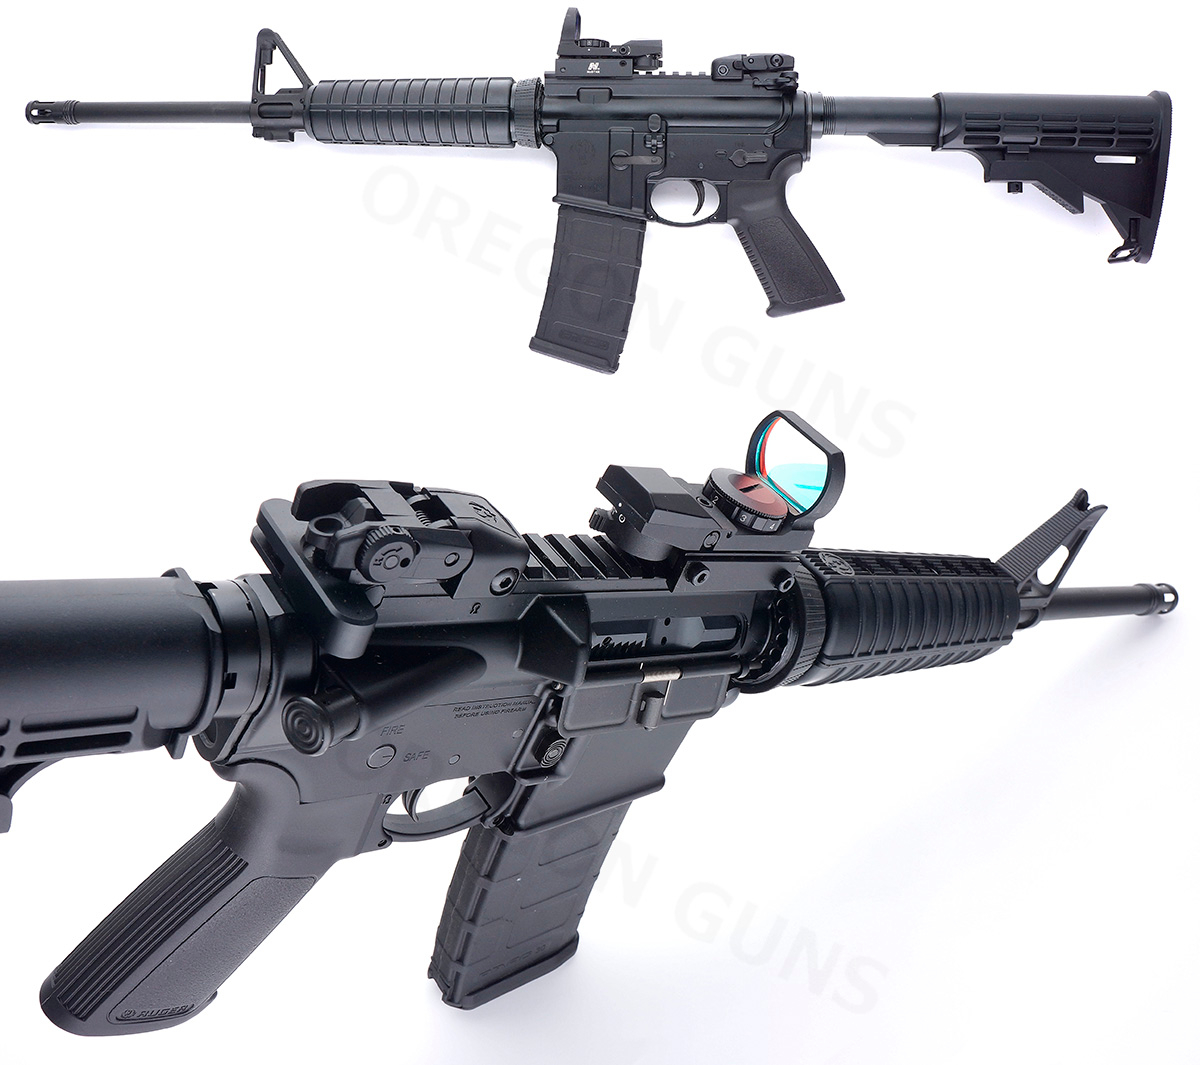 Ruger Ar 556 Ar15 Semiauto Rifle 223 5 56 Nato Like New Condition In Box Sn 855 56981 5 56mm Nato For Sale At Gunauction Com 17106357